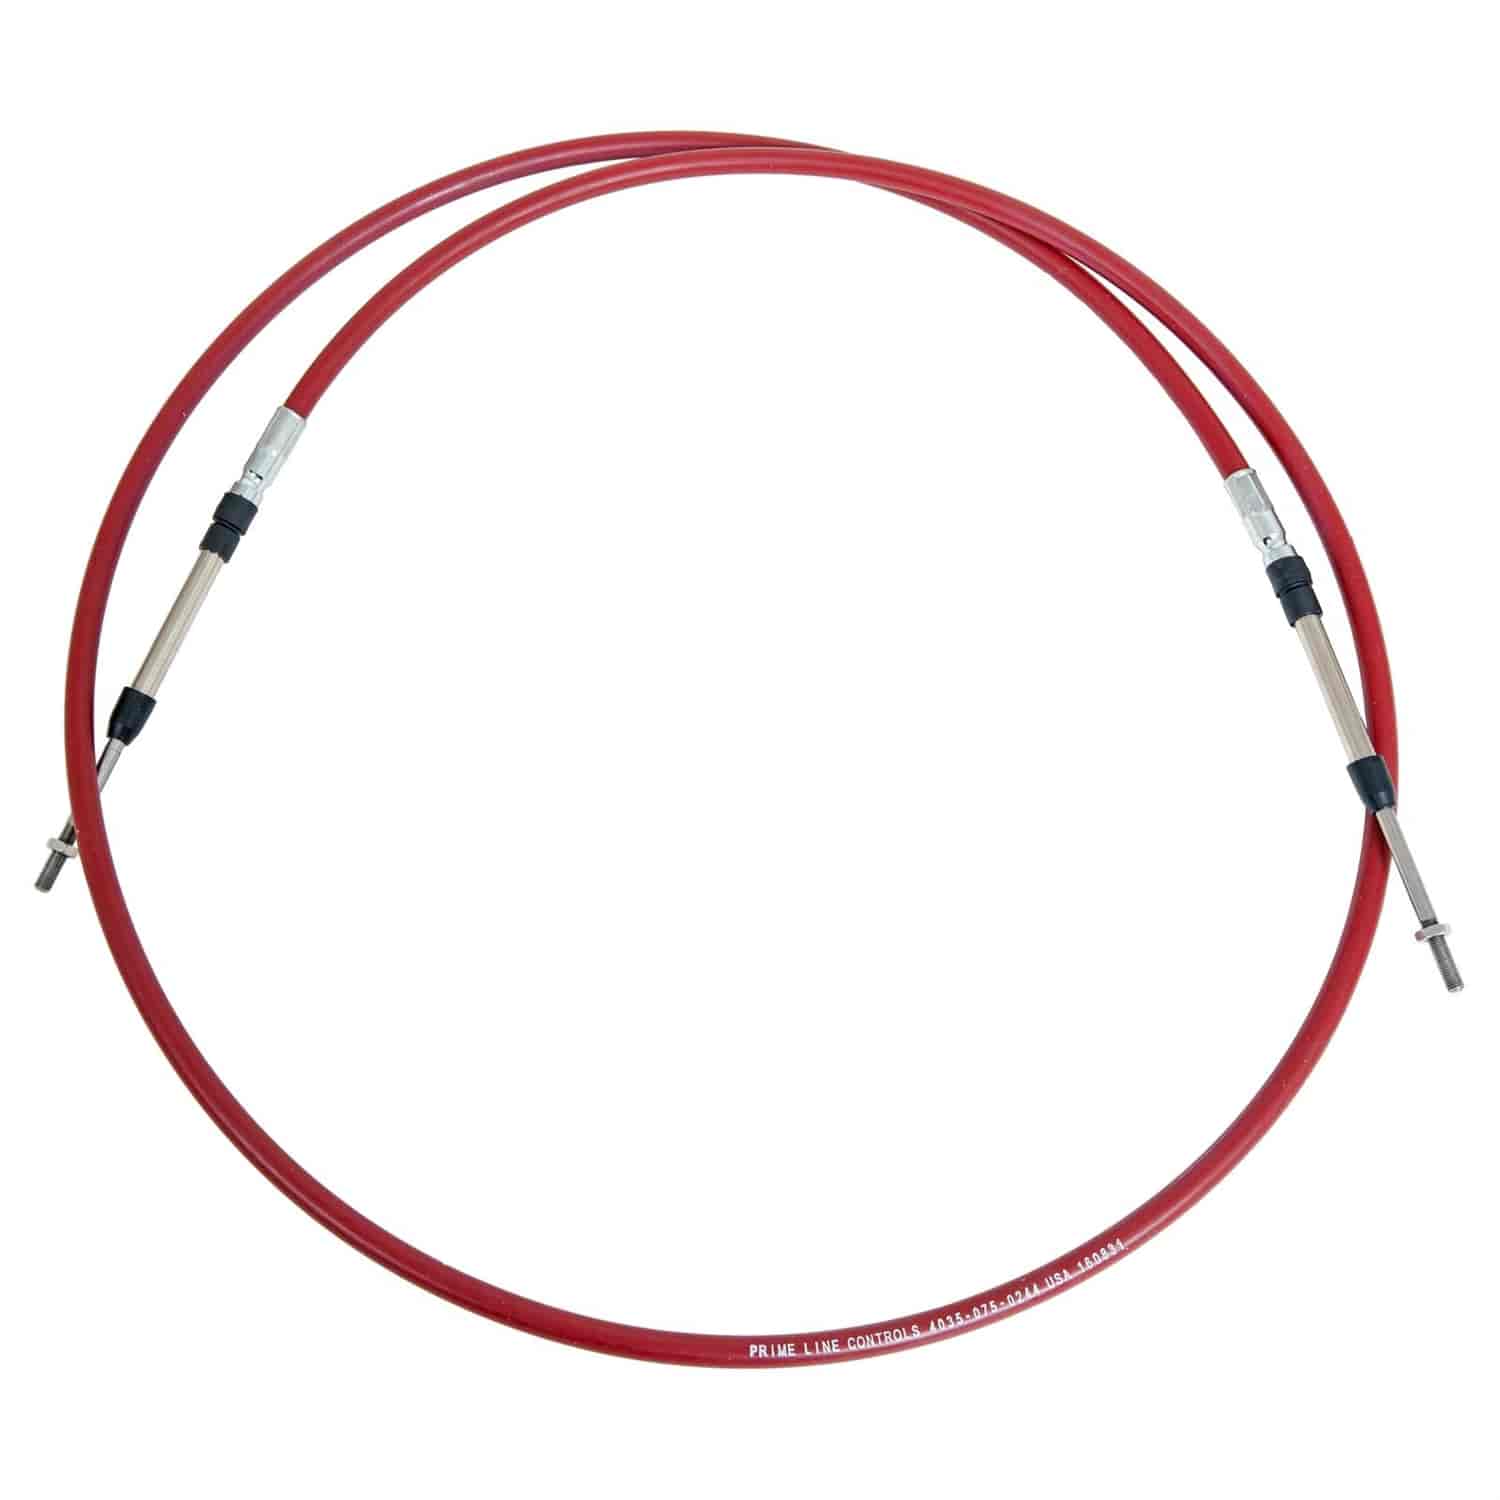 Turbo-Action CABLE 8 FT